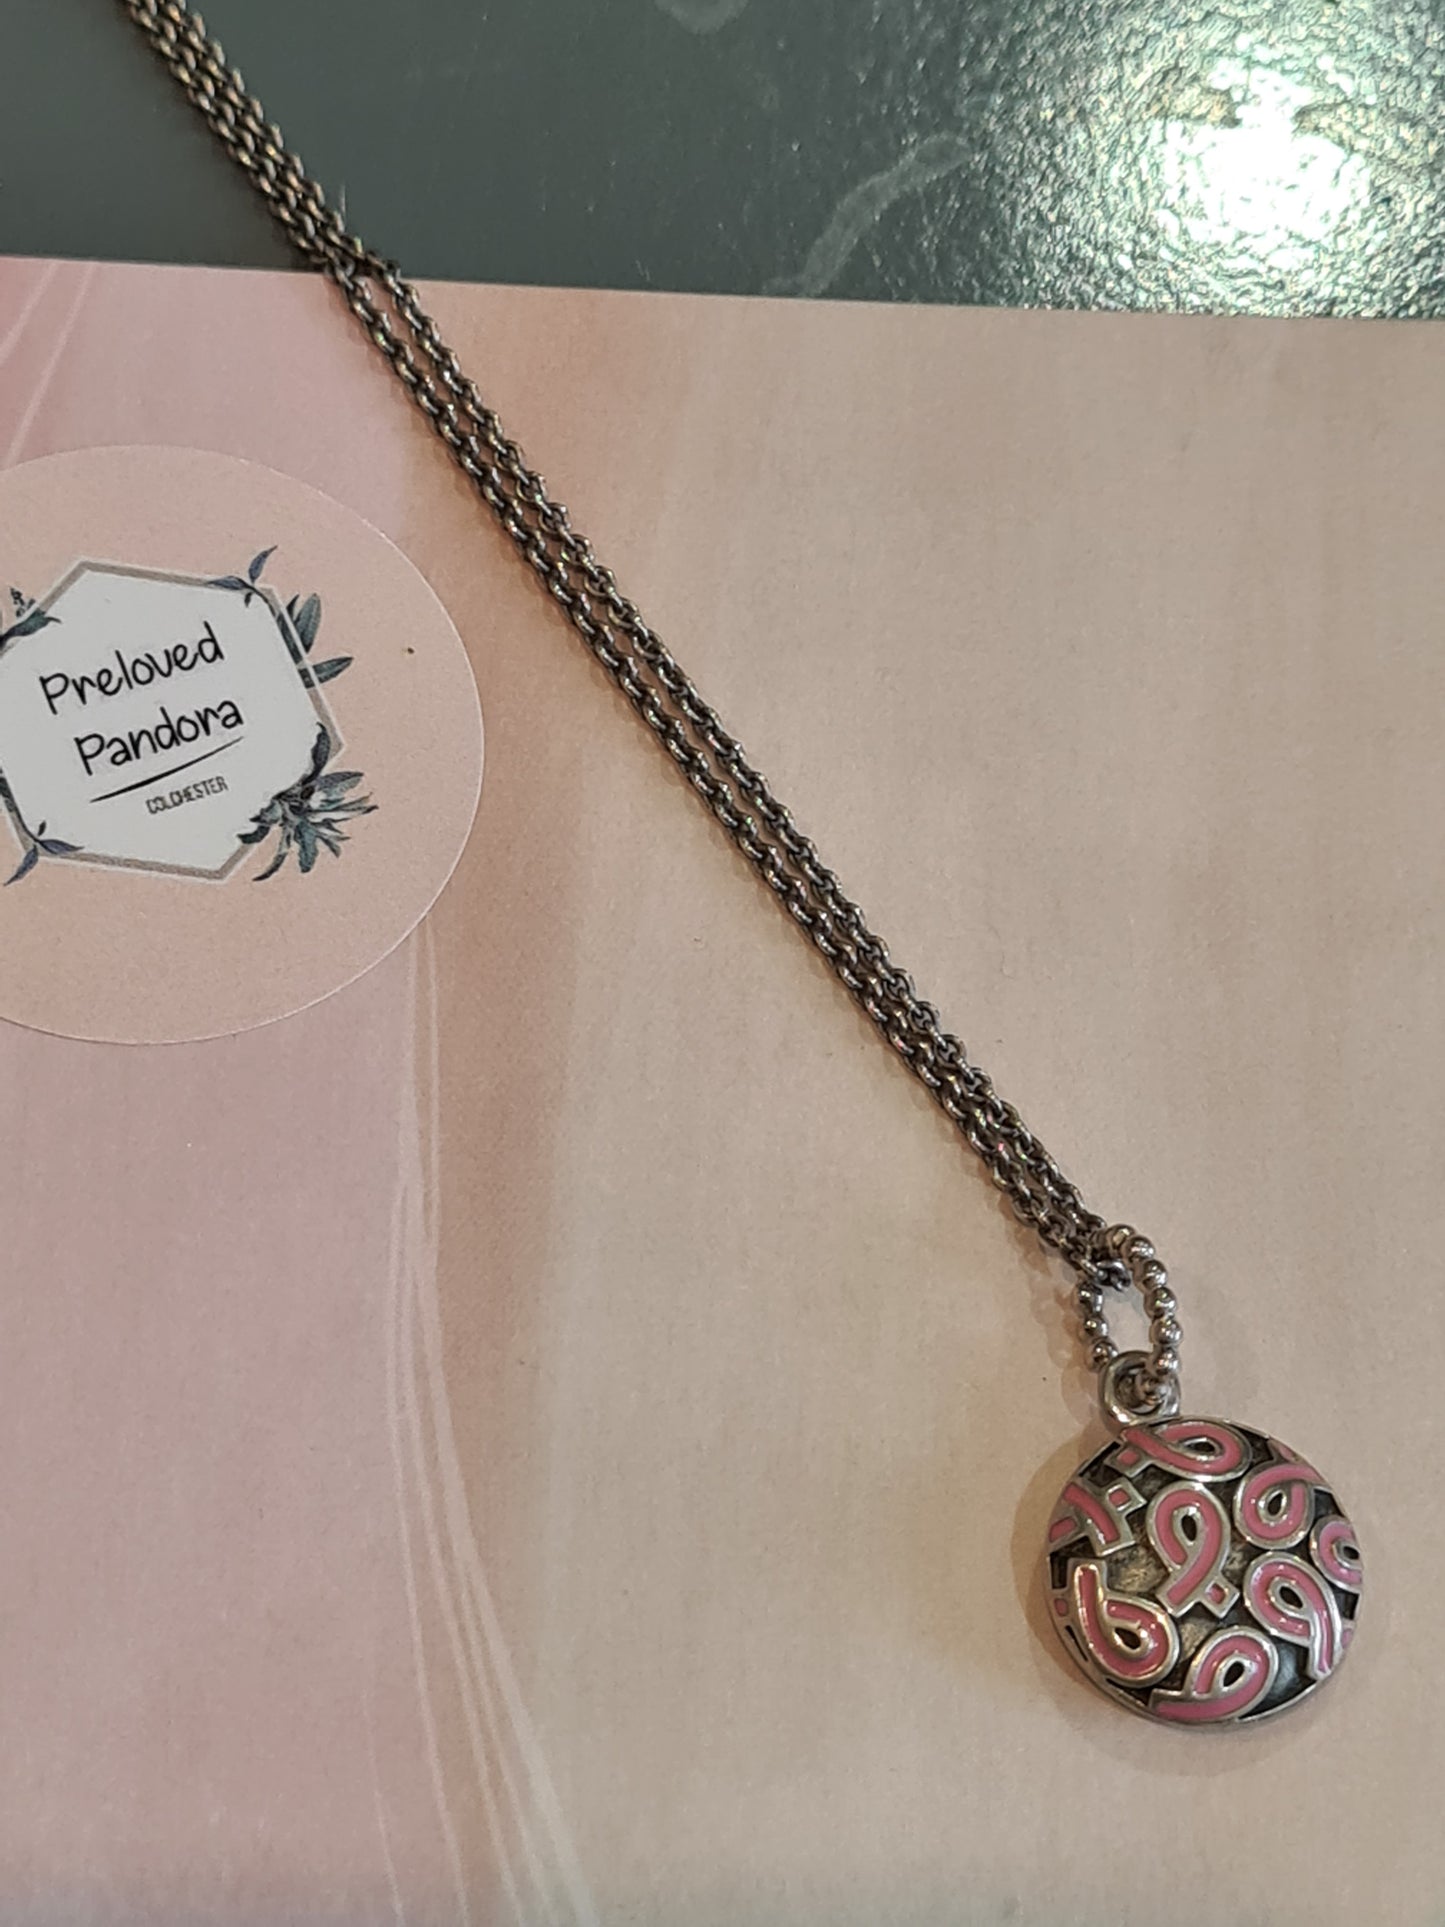 Genuine Pandora Breast Cancer Pendant With 80cm Chain Retired and Rare Necklace